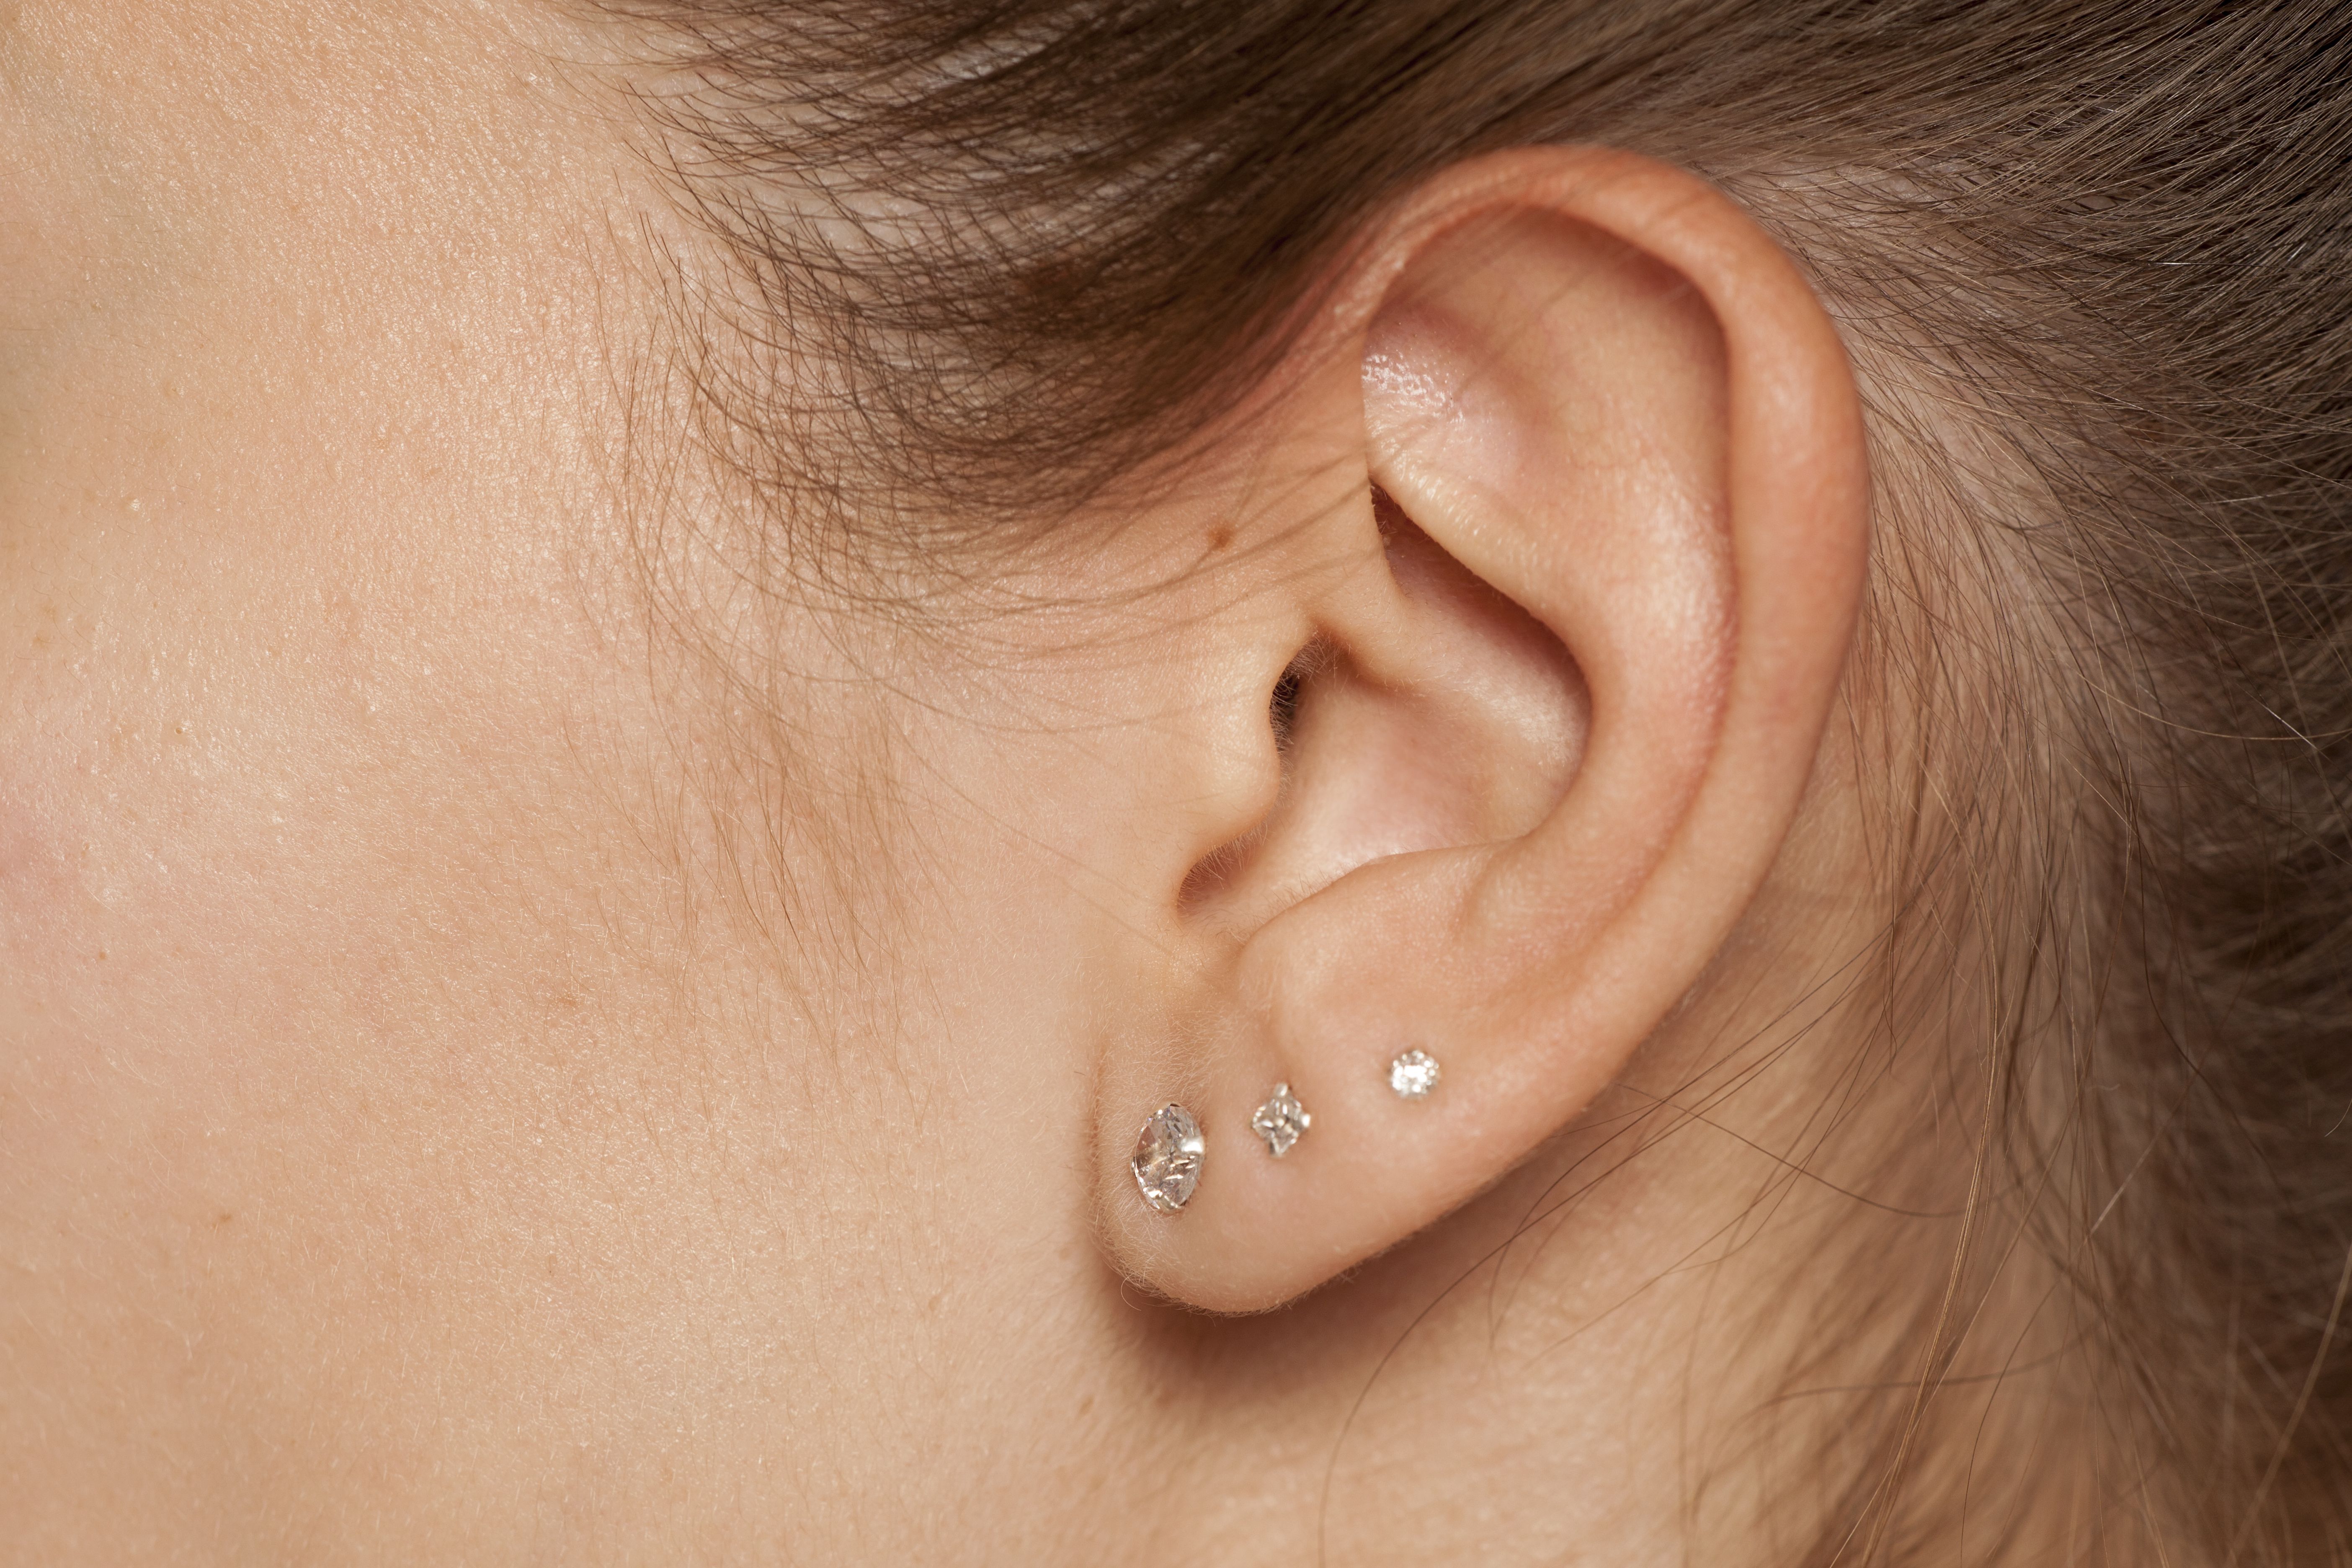 What Causes Scabs In My Ear? – Balmonds